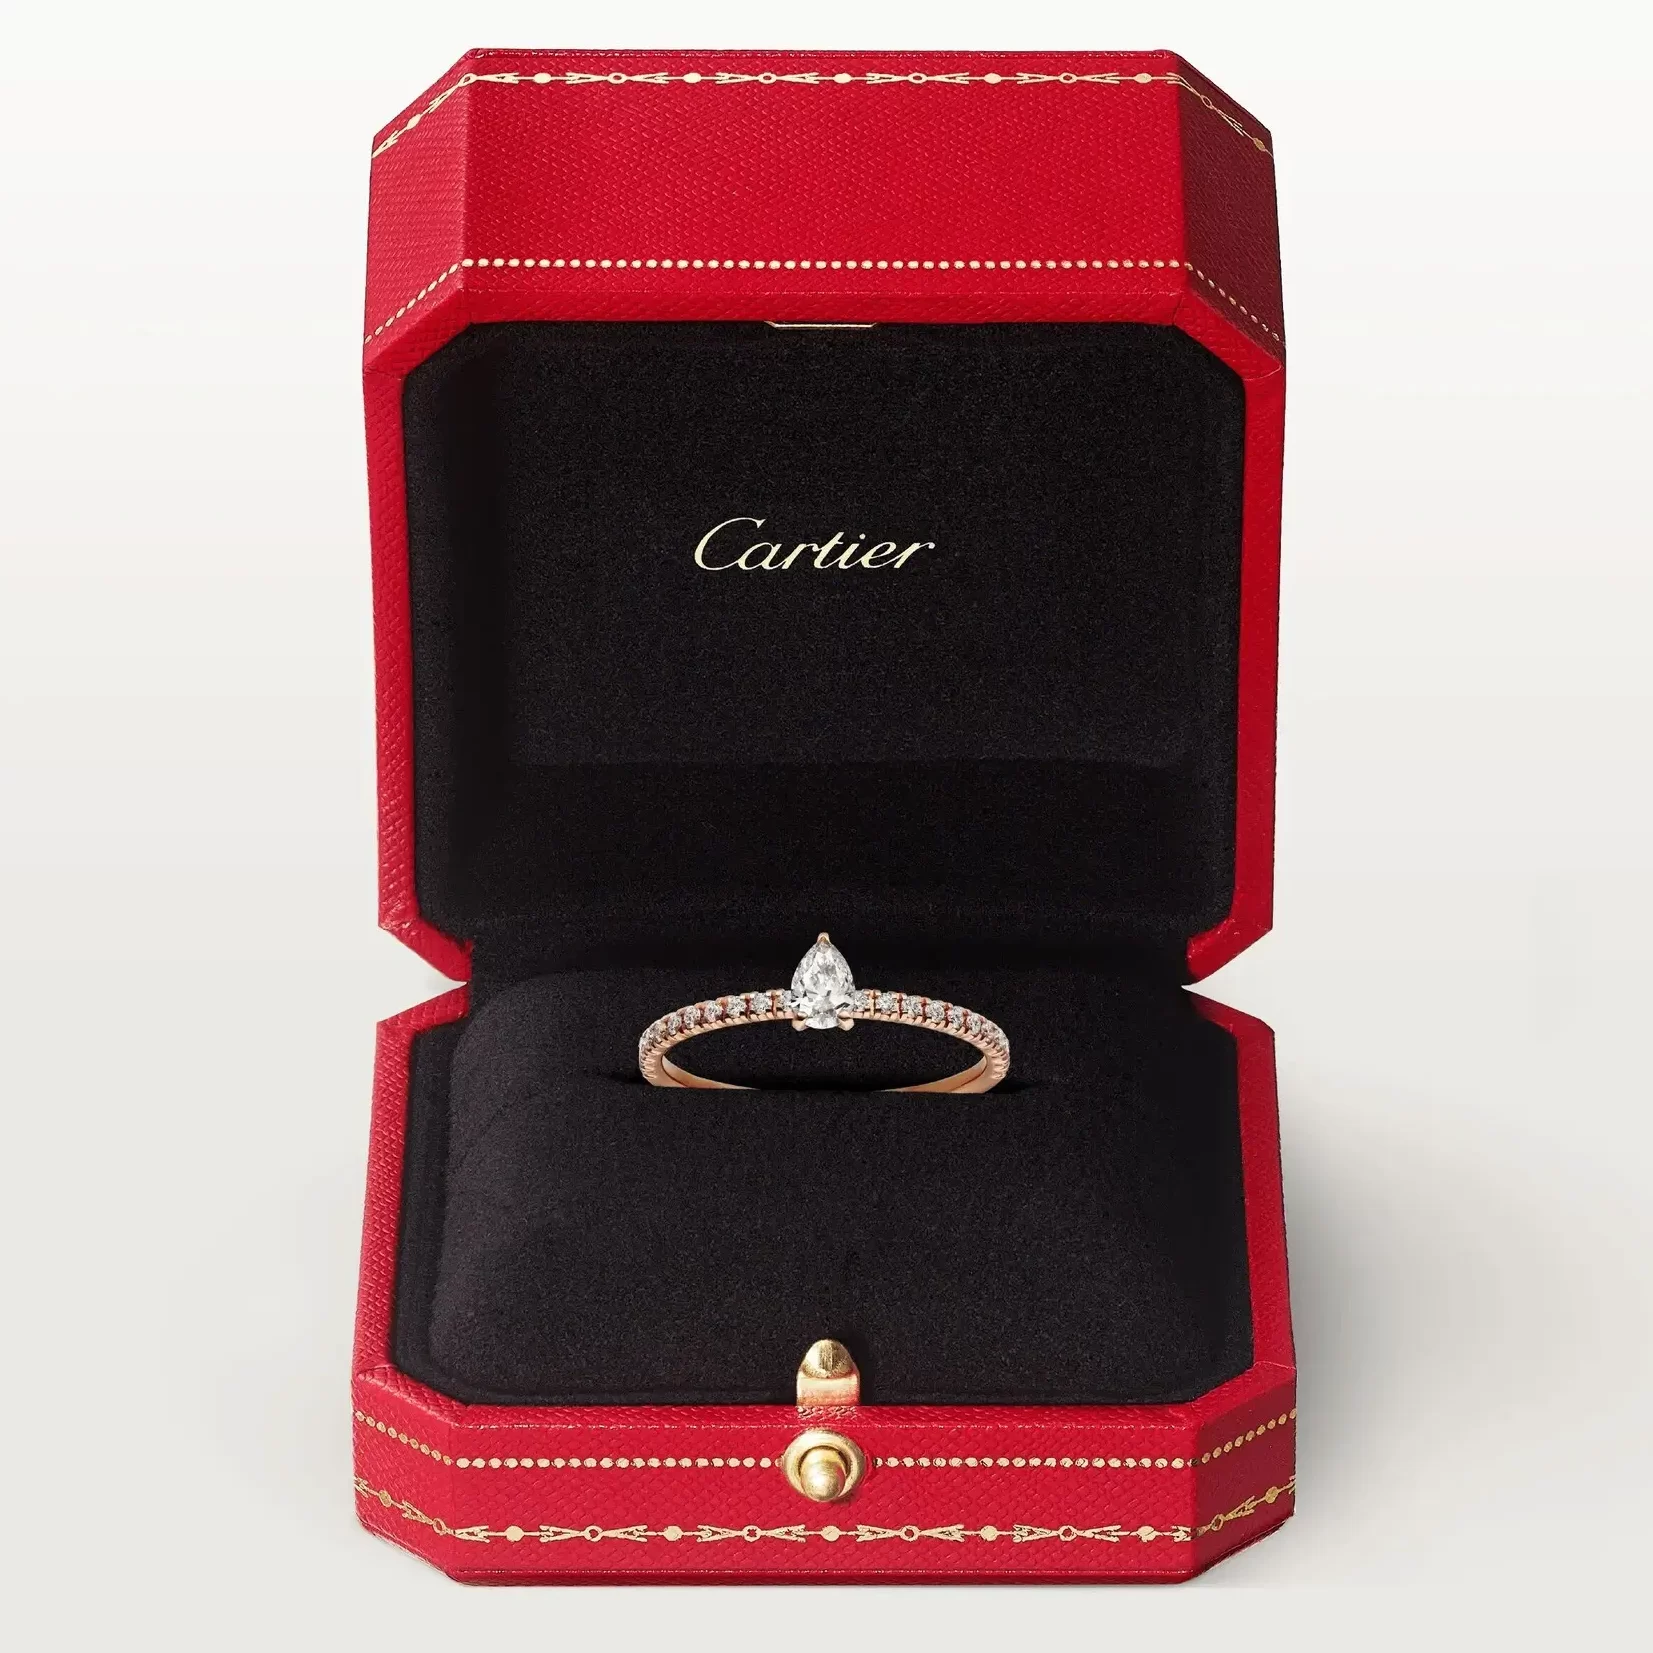 rose gold pear-shaped diamond ring in red jewelry box